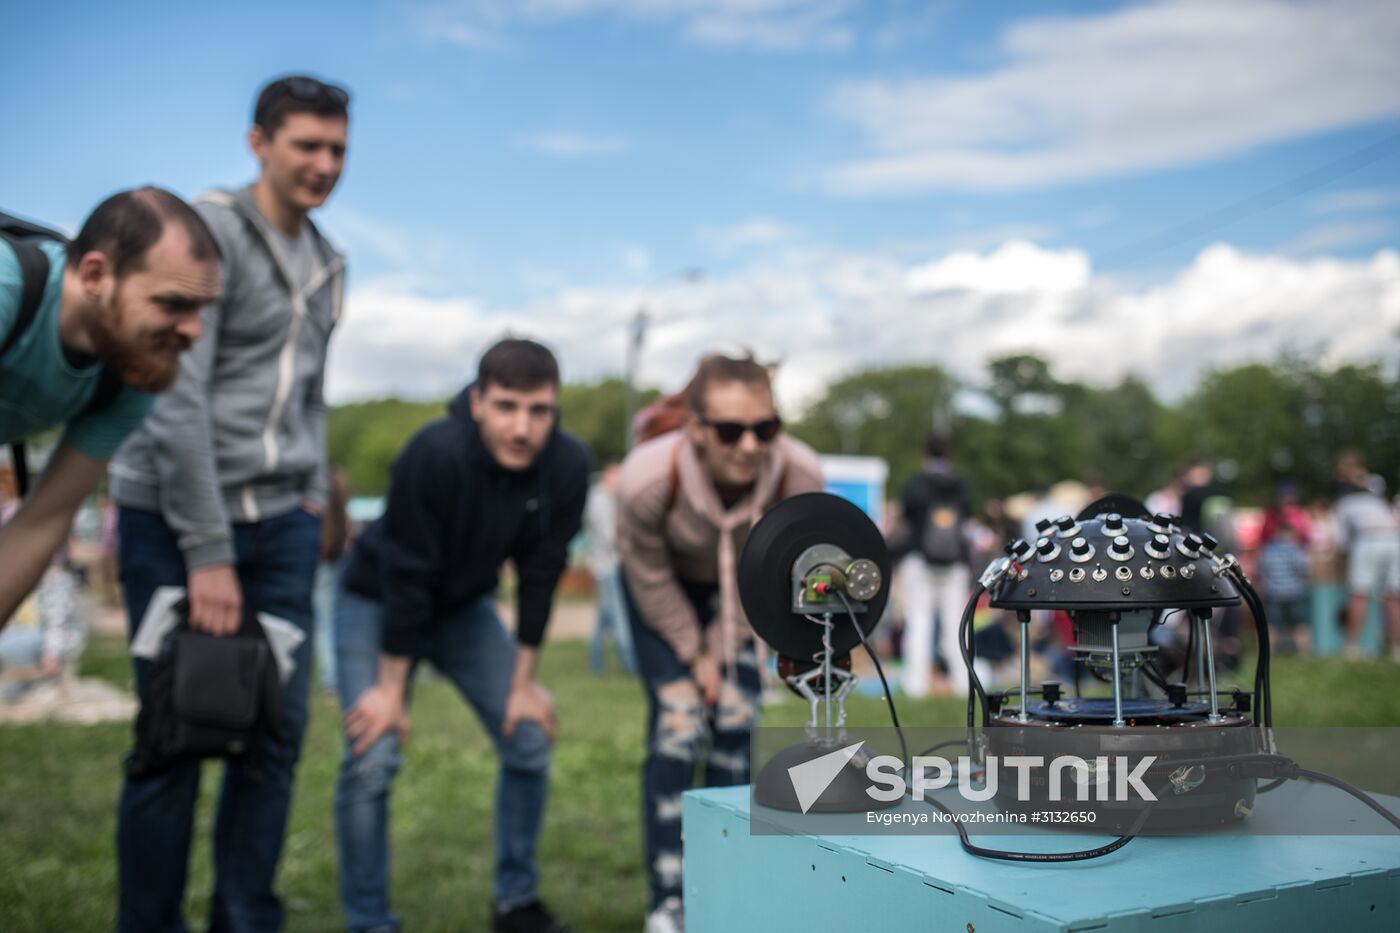 Kaspersky Geek Picnic: A Beautiful Mind 2017 festival of science, technology and arts